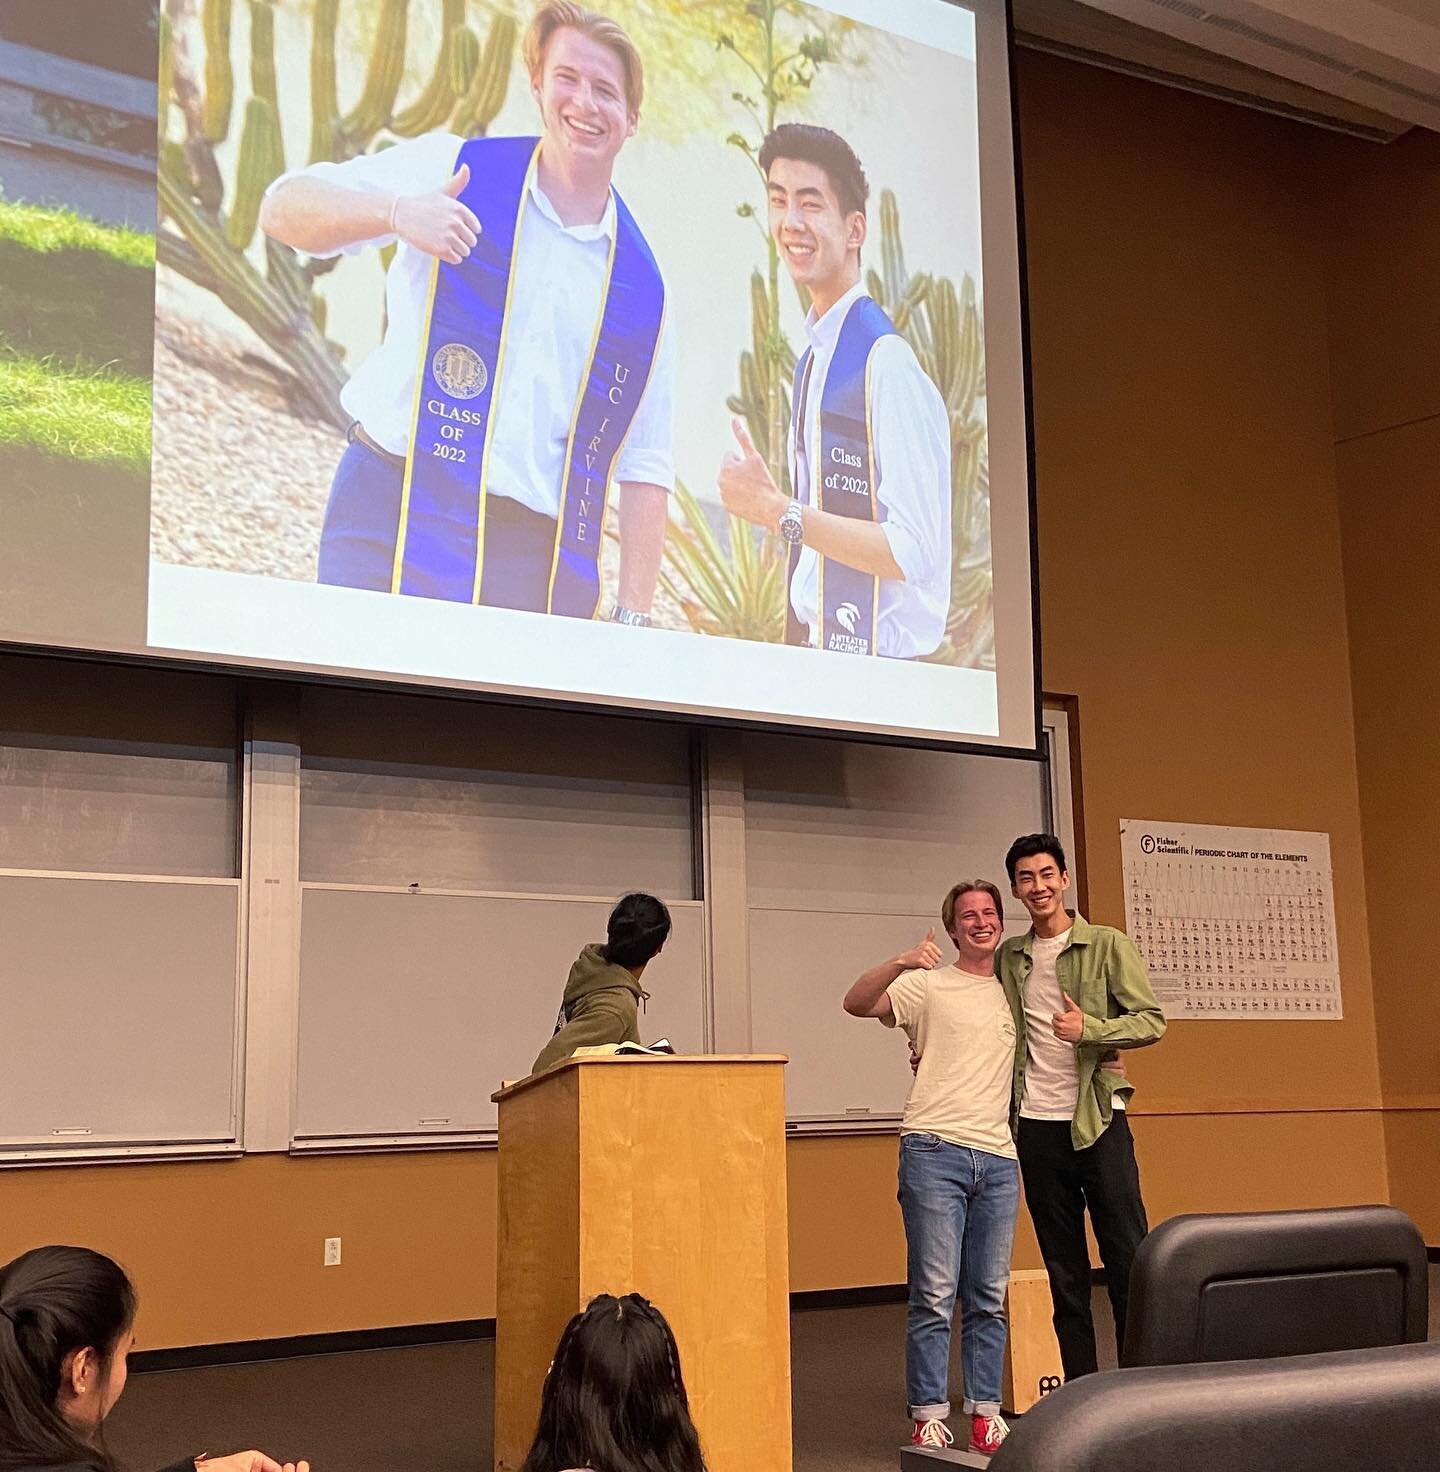 Celebrated our graduating seniors, Joseph and Josh, at last night&rsquo;s weekly meeting! Thank you Josh for sharing some of what you&rsquo;ve learned during your time at UCI with us. We&rsquo;re going to miss you both but can&rsquo;t wait to see wha